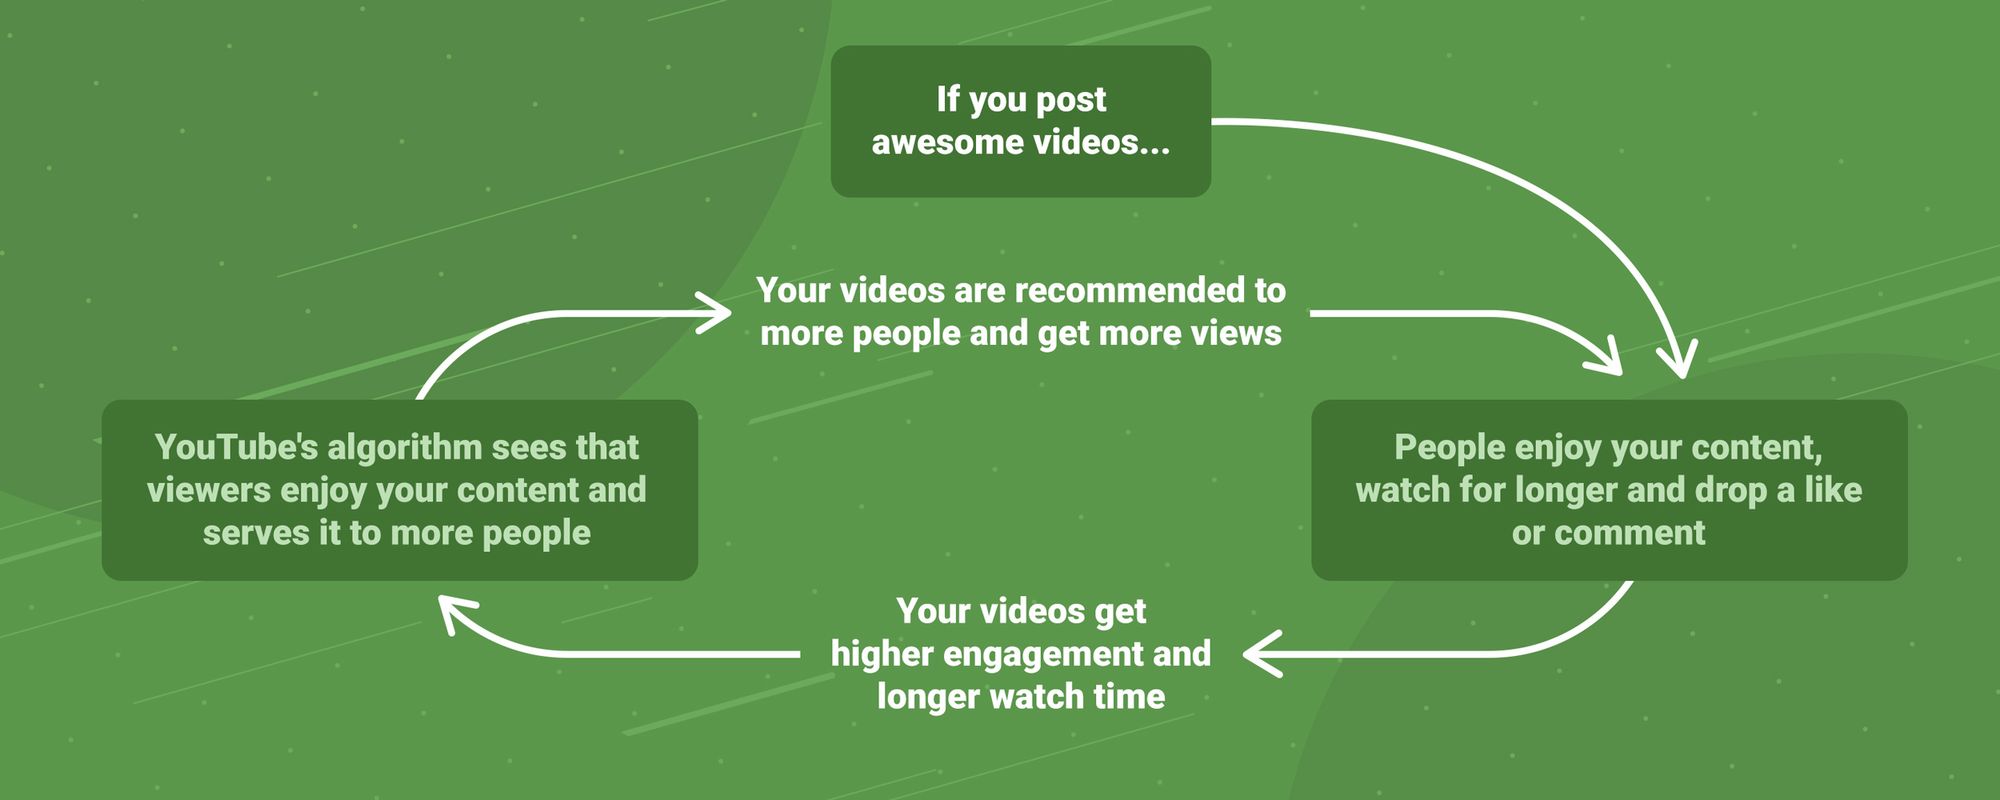 Flow chart showing how great videos will result in more watch time and engagement, which means YouTube's algorithm will share it further.